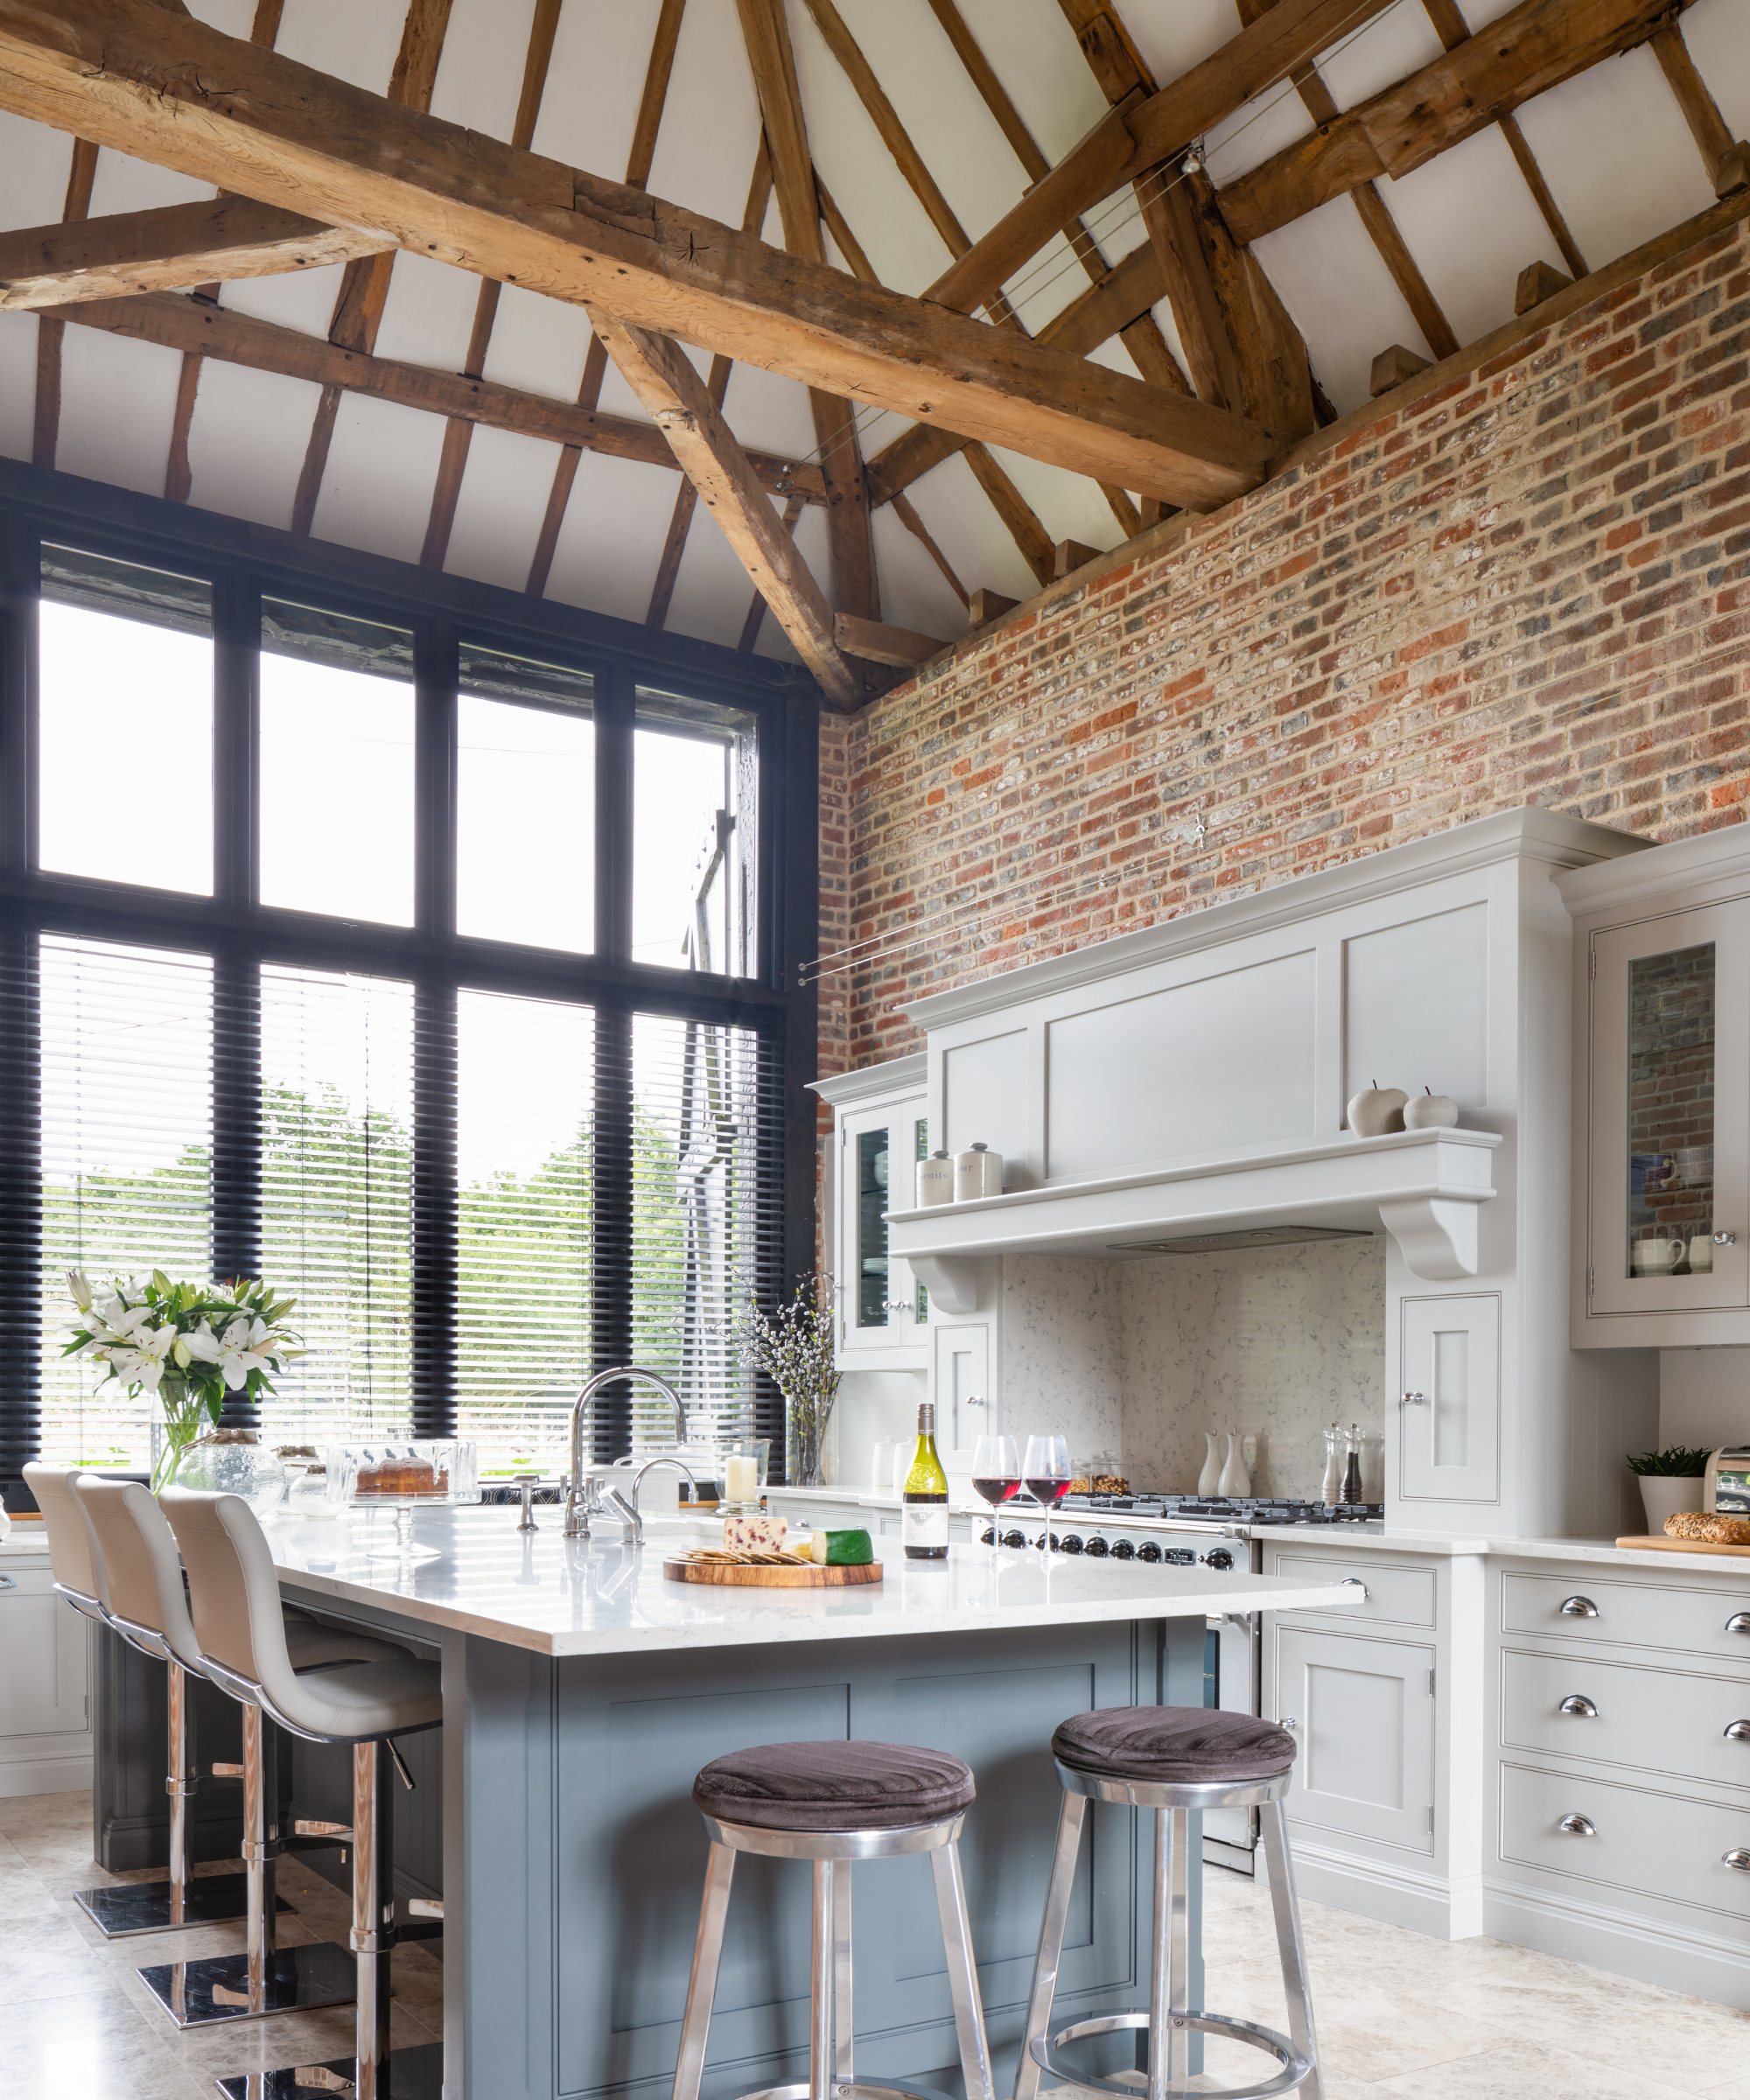 Open plan kitchen ideas in a tall beamed space with exposed brick wall, pale gray cabinetry and a kitchen island.